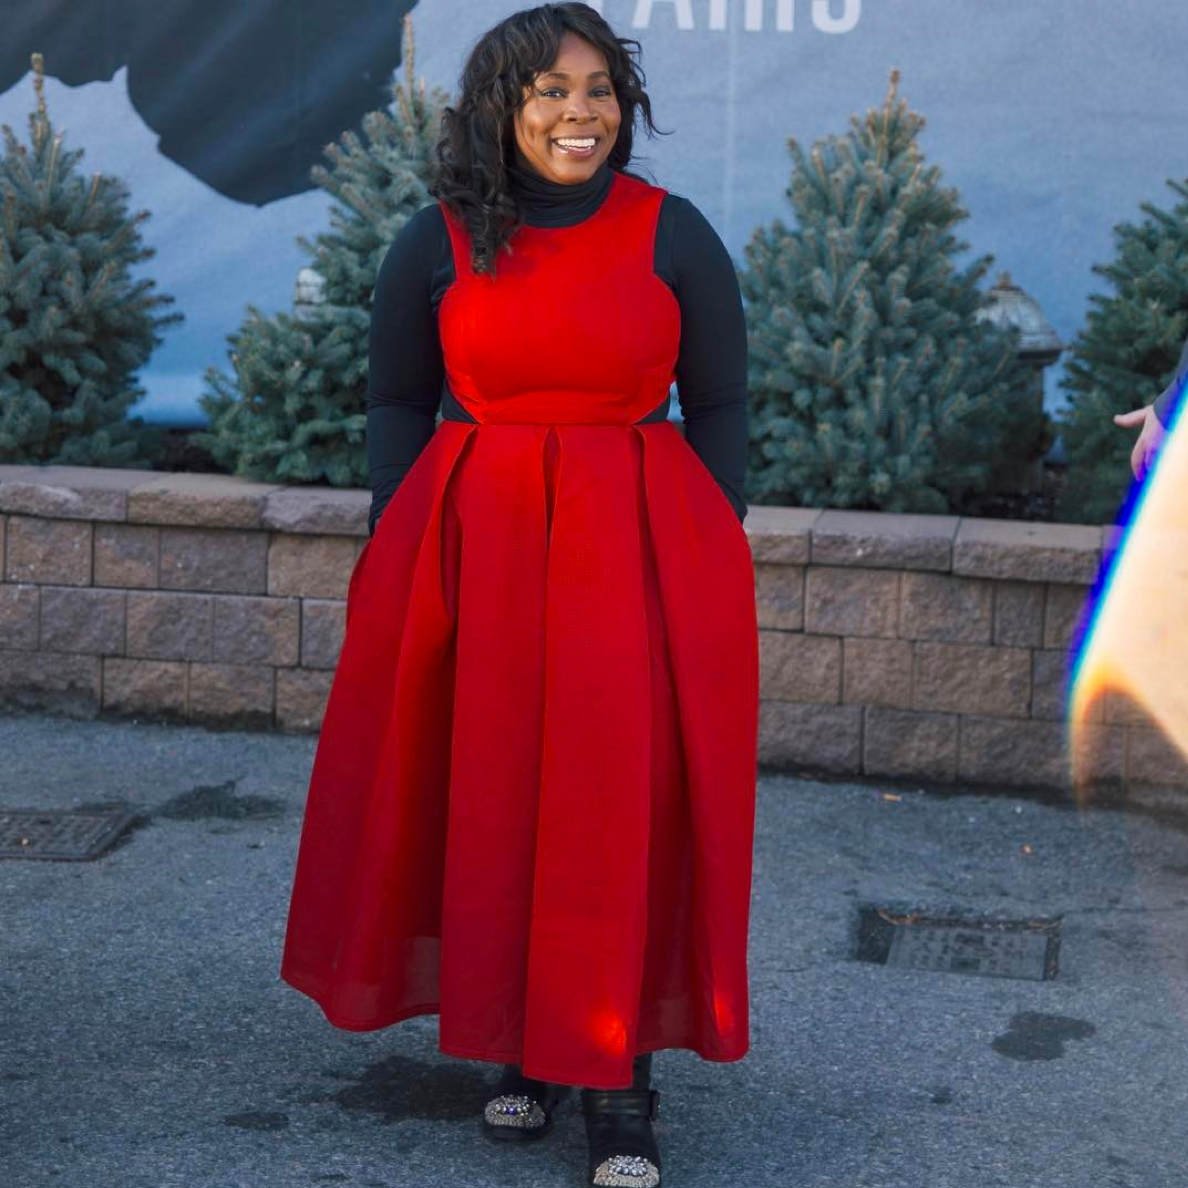 Why We’re Crushing on This Curvy Girl’s Super Stylish Instagram